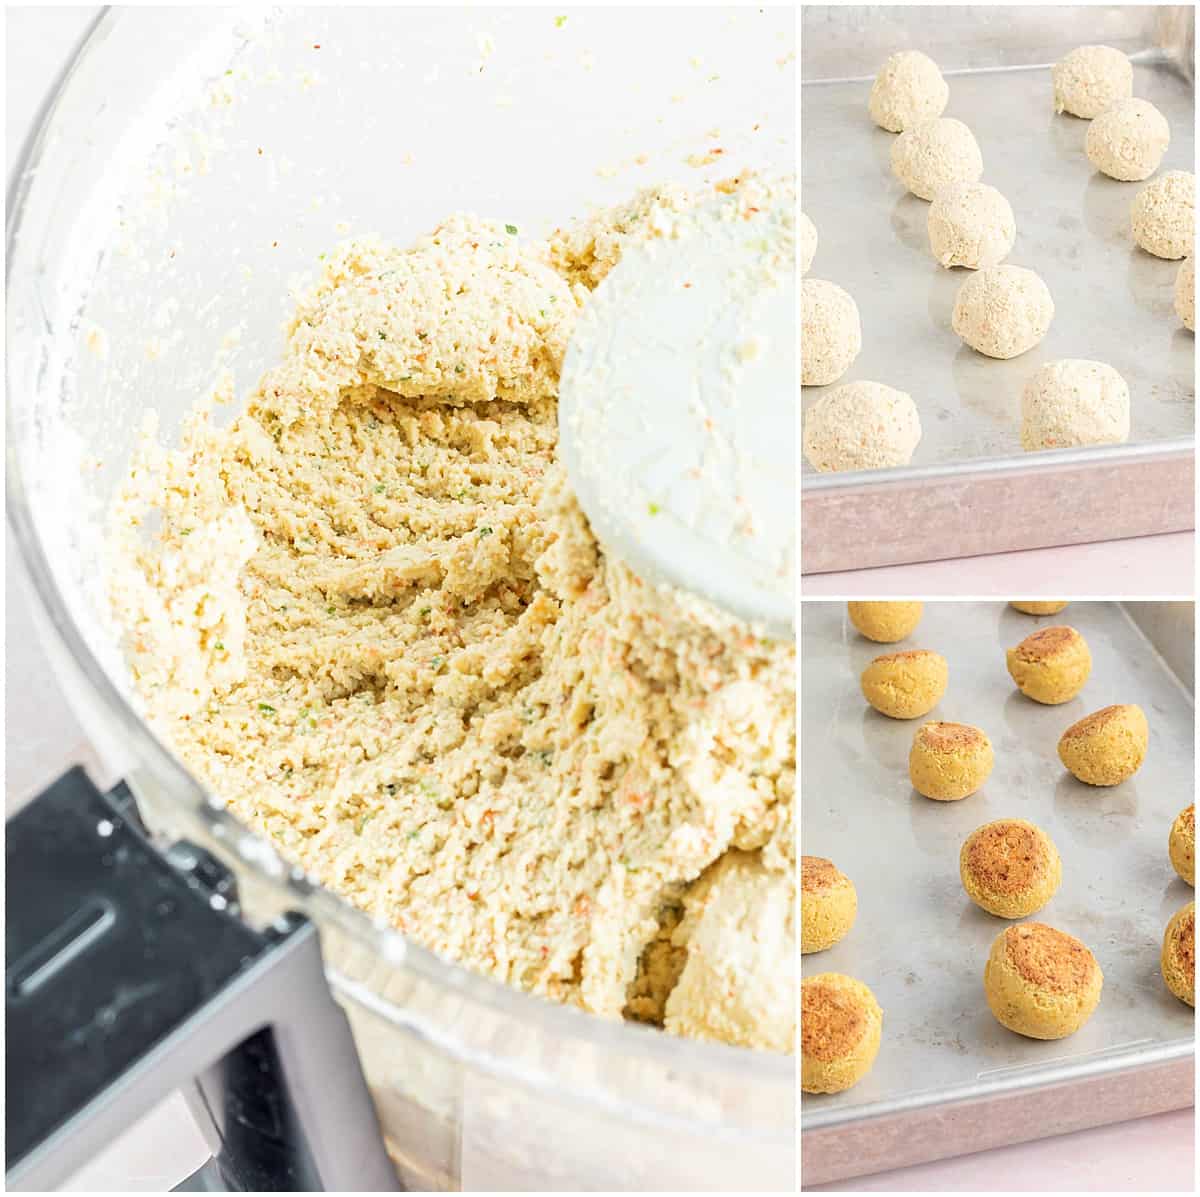 Process photos of tofu meatball mixture in food processor, rolled into balls on baking sheet, and baked